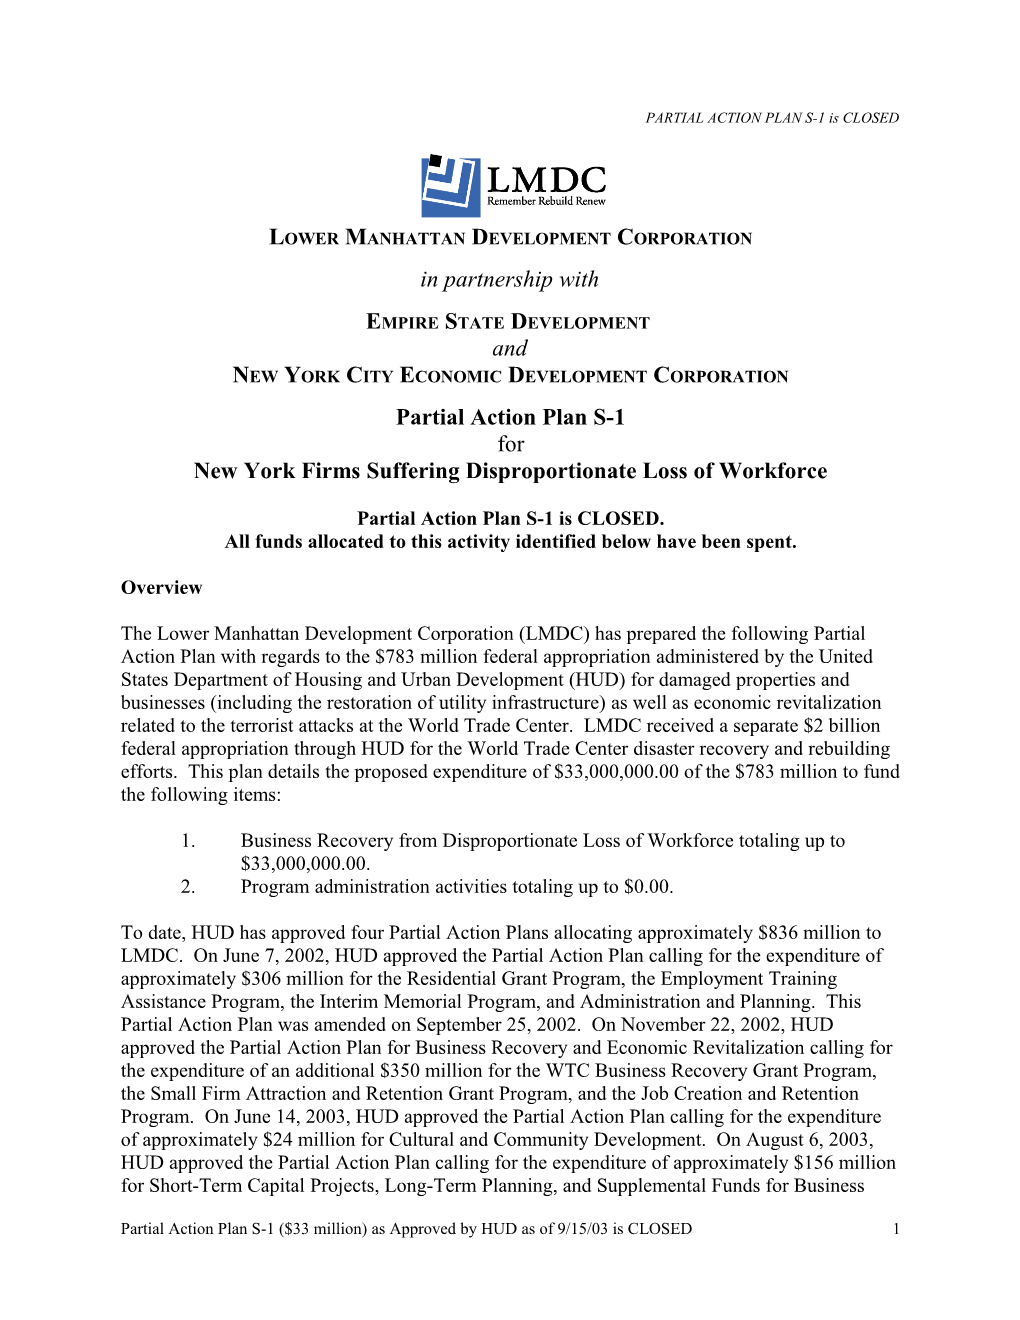 New York State Amended Action Plan